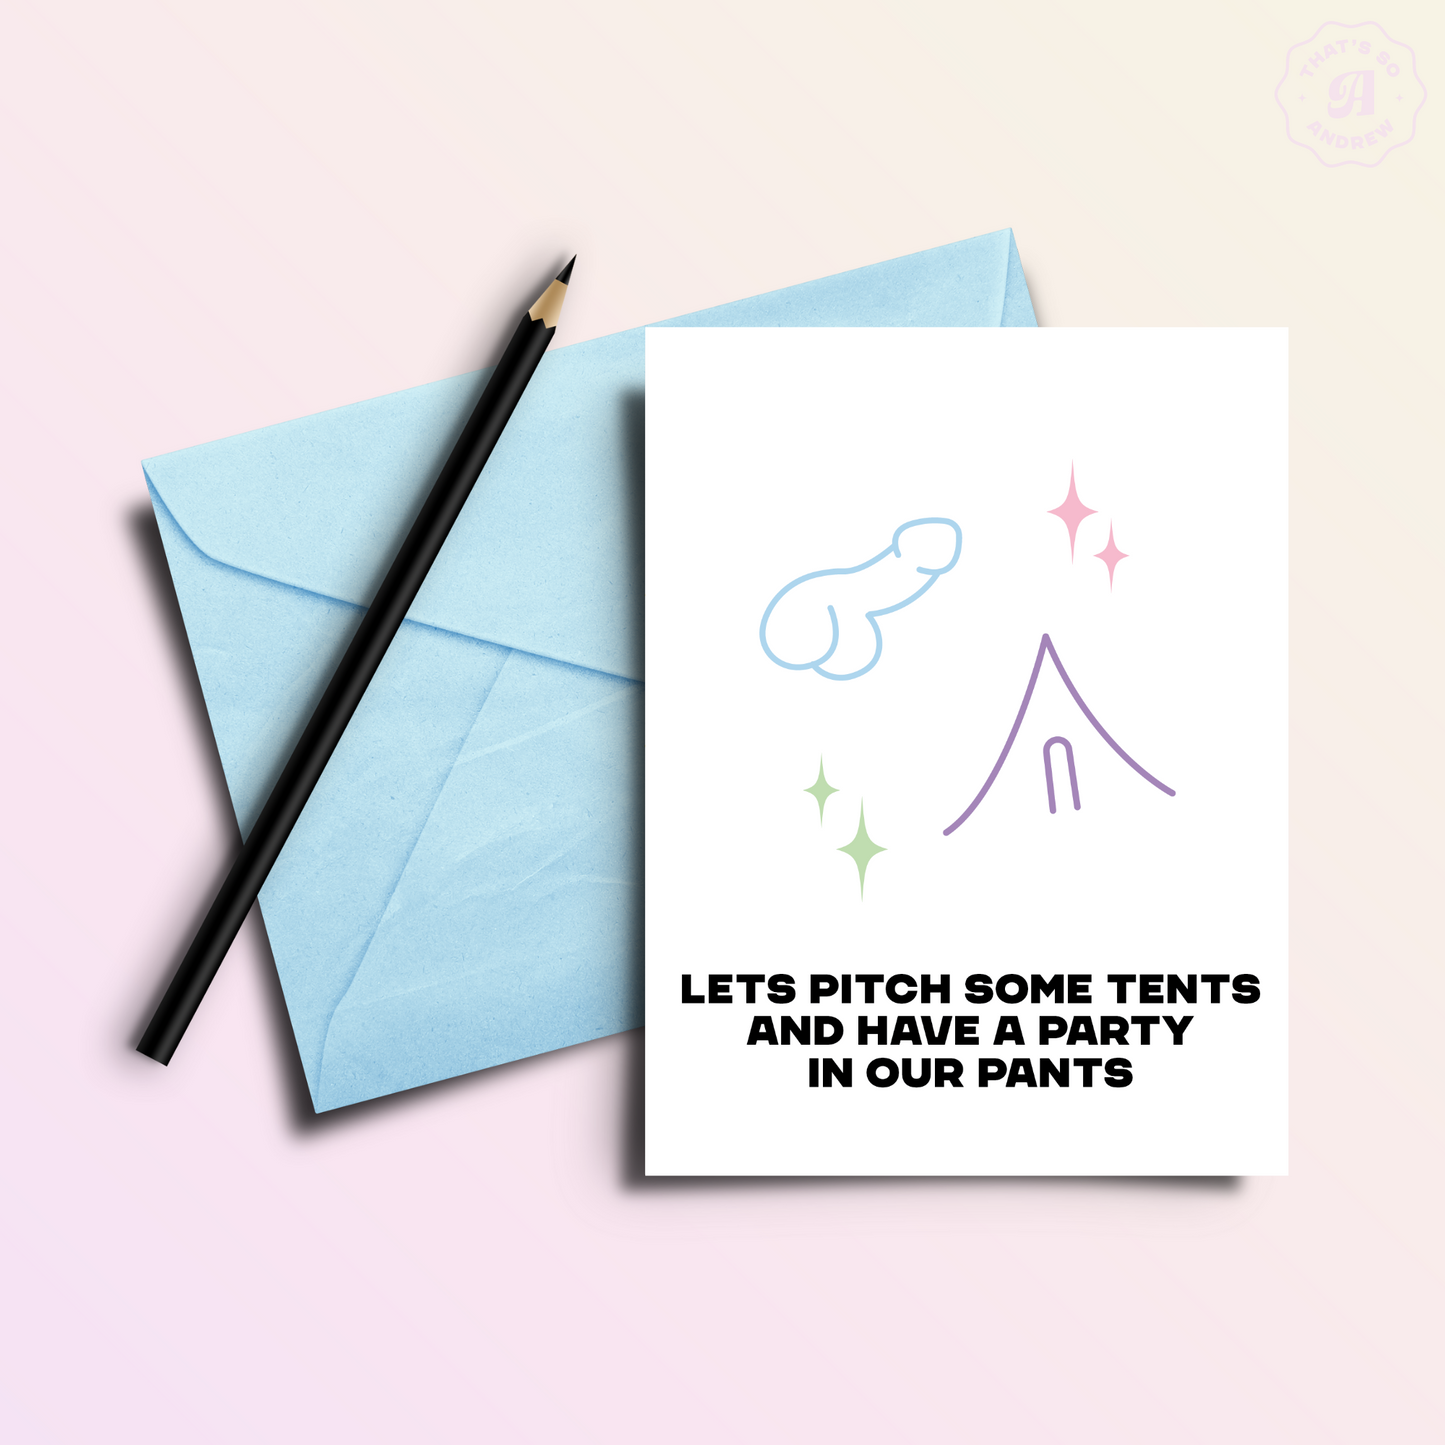 Pitch Tents | Funny and Dirty Gay Adult Birthday Greeting Card